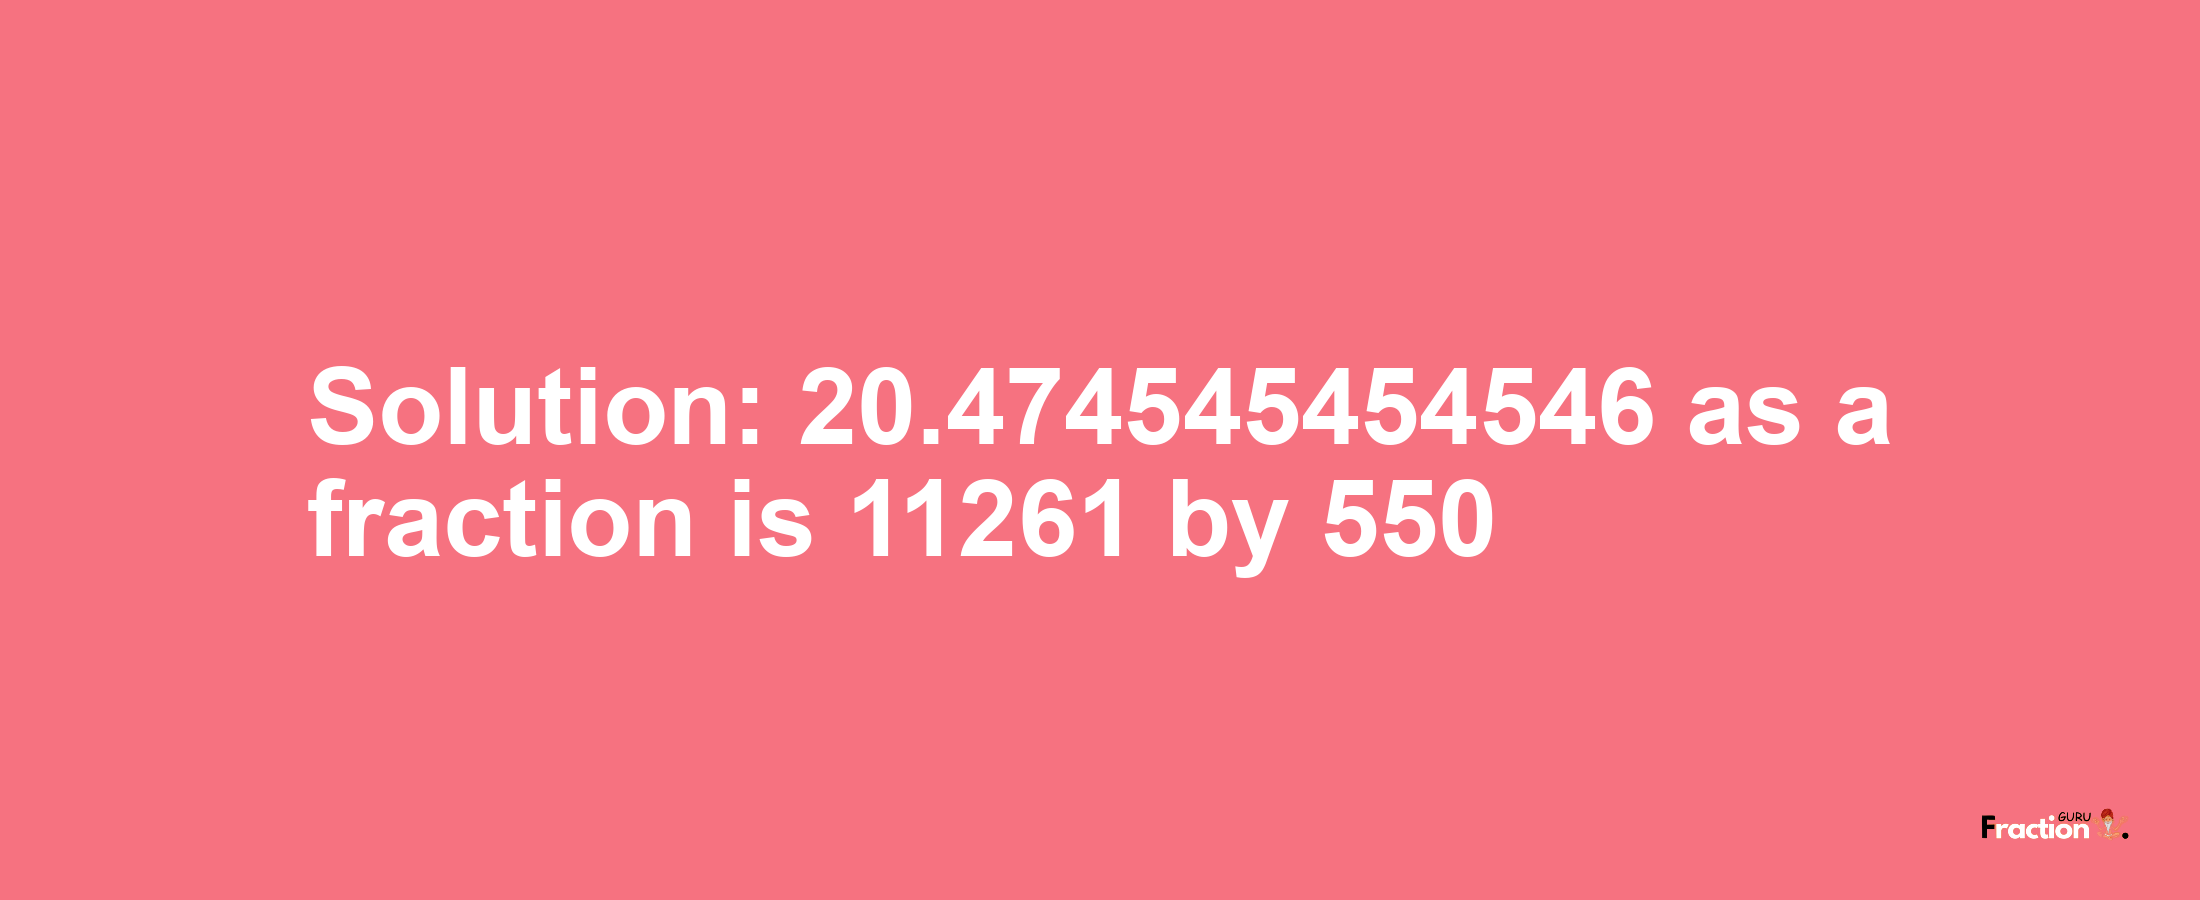 Solution:20.474545454546 as a fraction is 11261/550